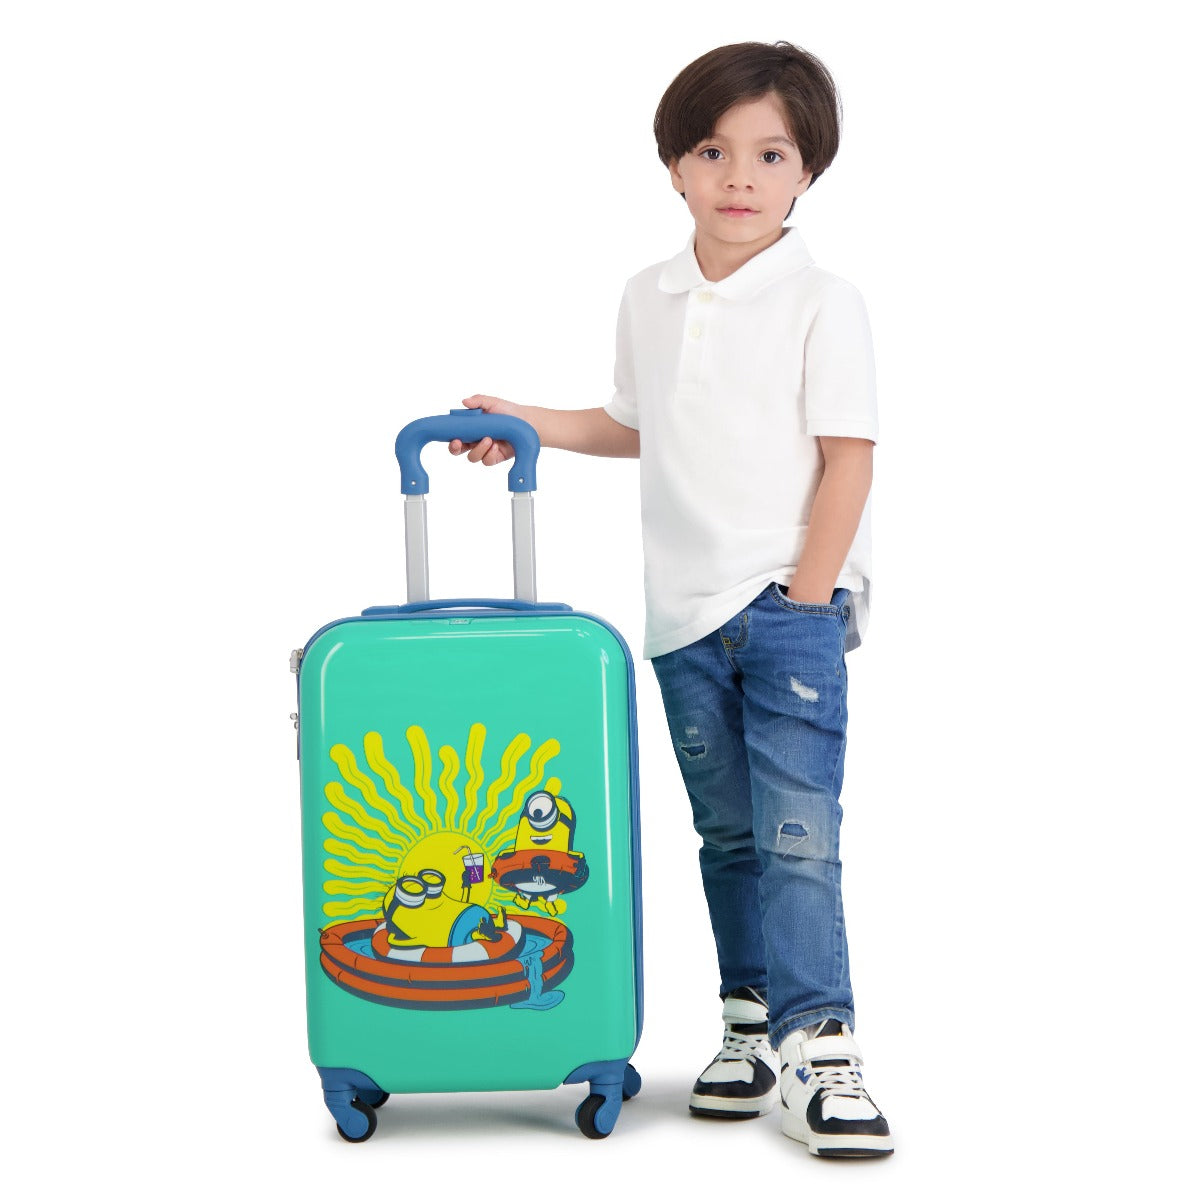 Ful Minions Vacation kids 21 inch hardside spinner suitcase rolling luggage for kids